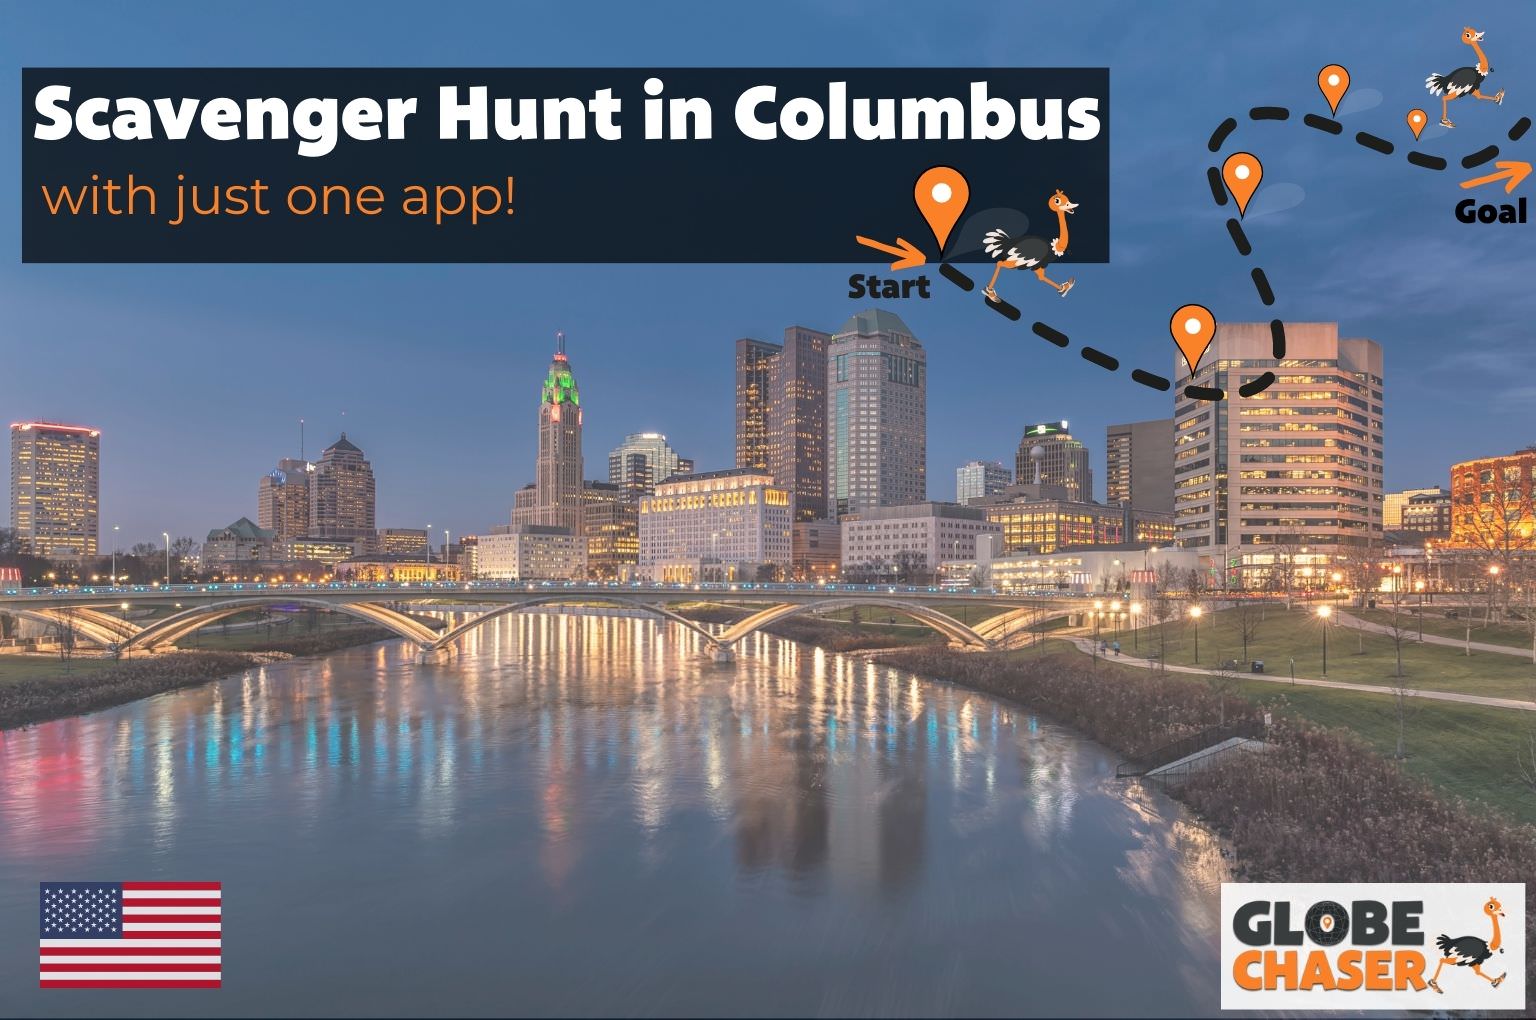 Scavenger Hunt in Columbus, USA - Family Activities with the Globe Chaser App for Outdoor Fun